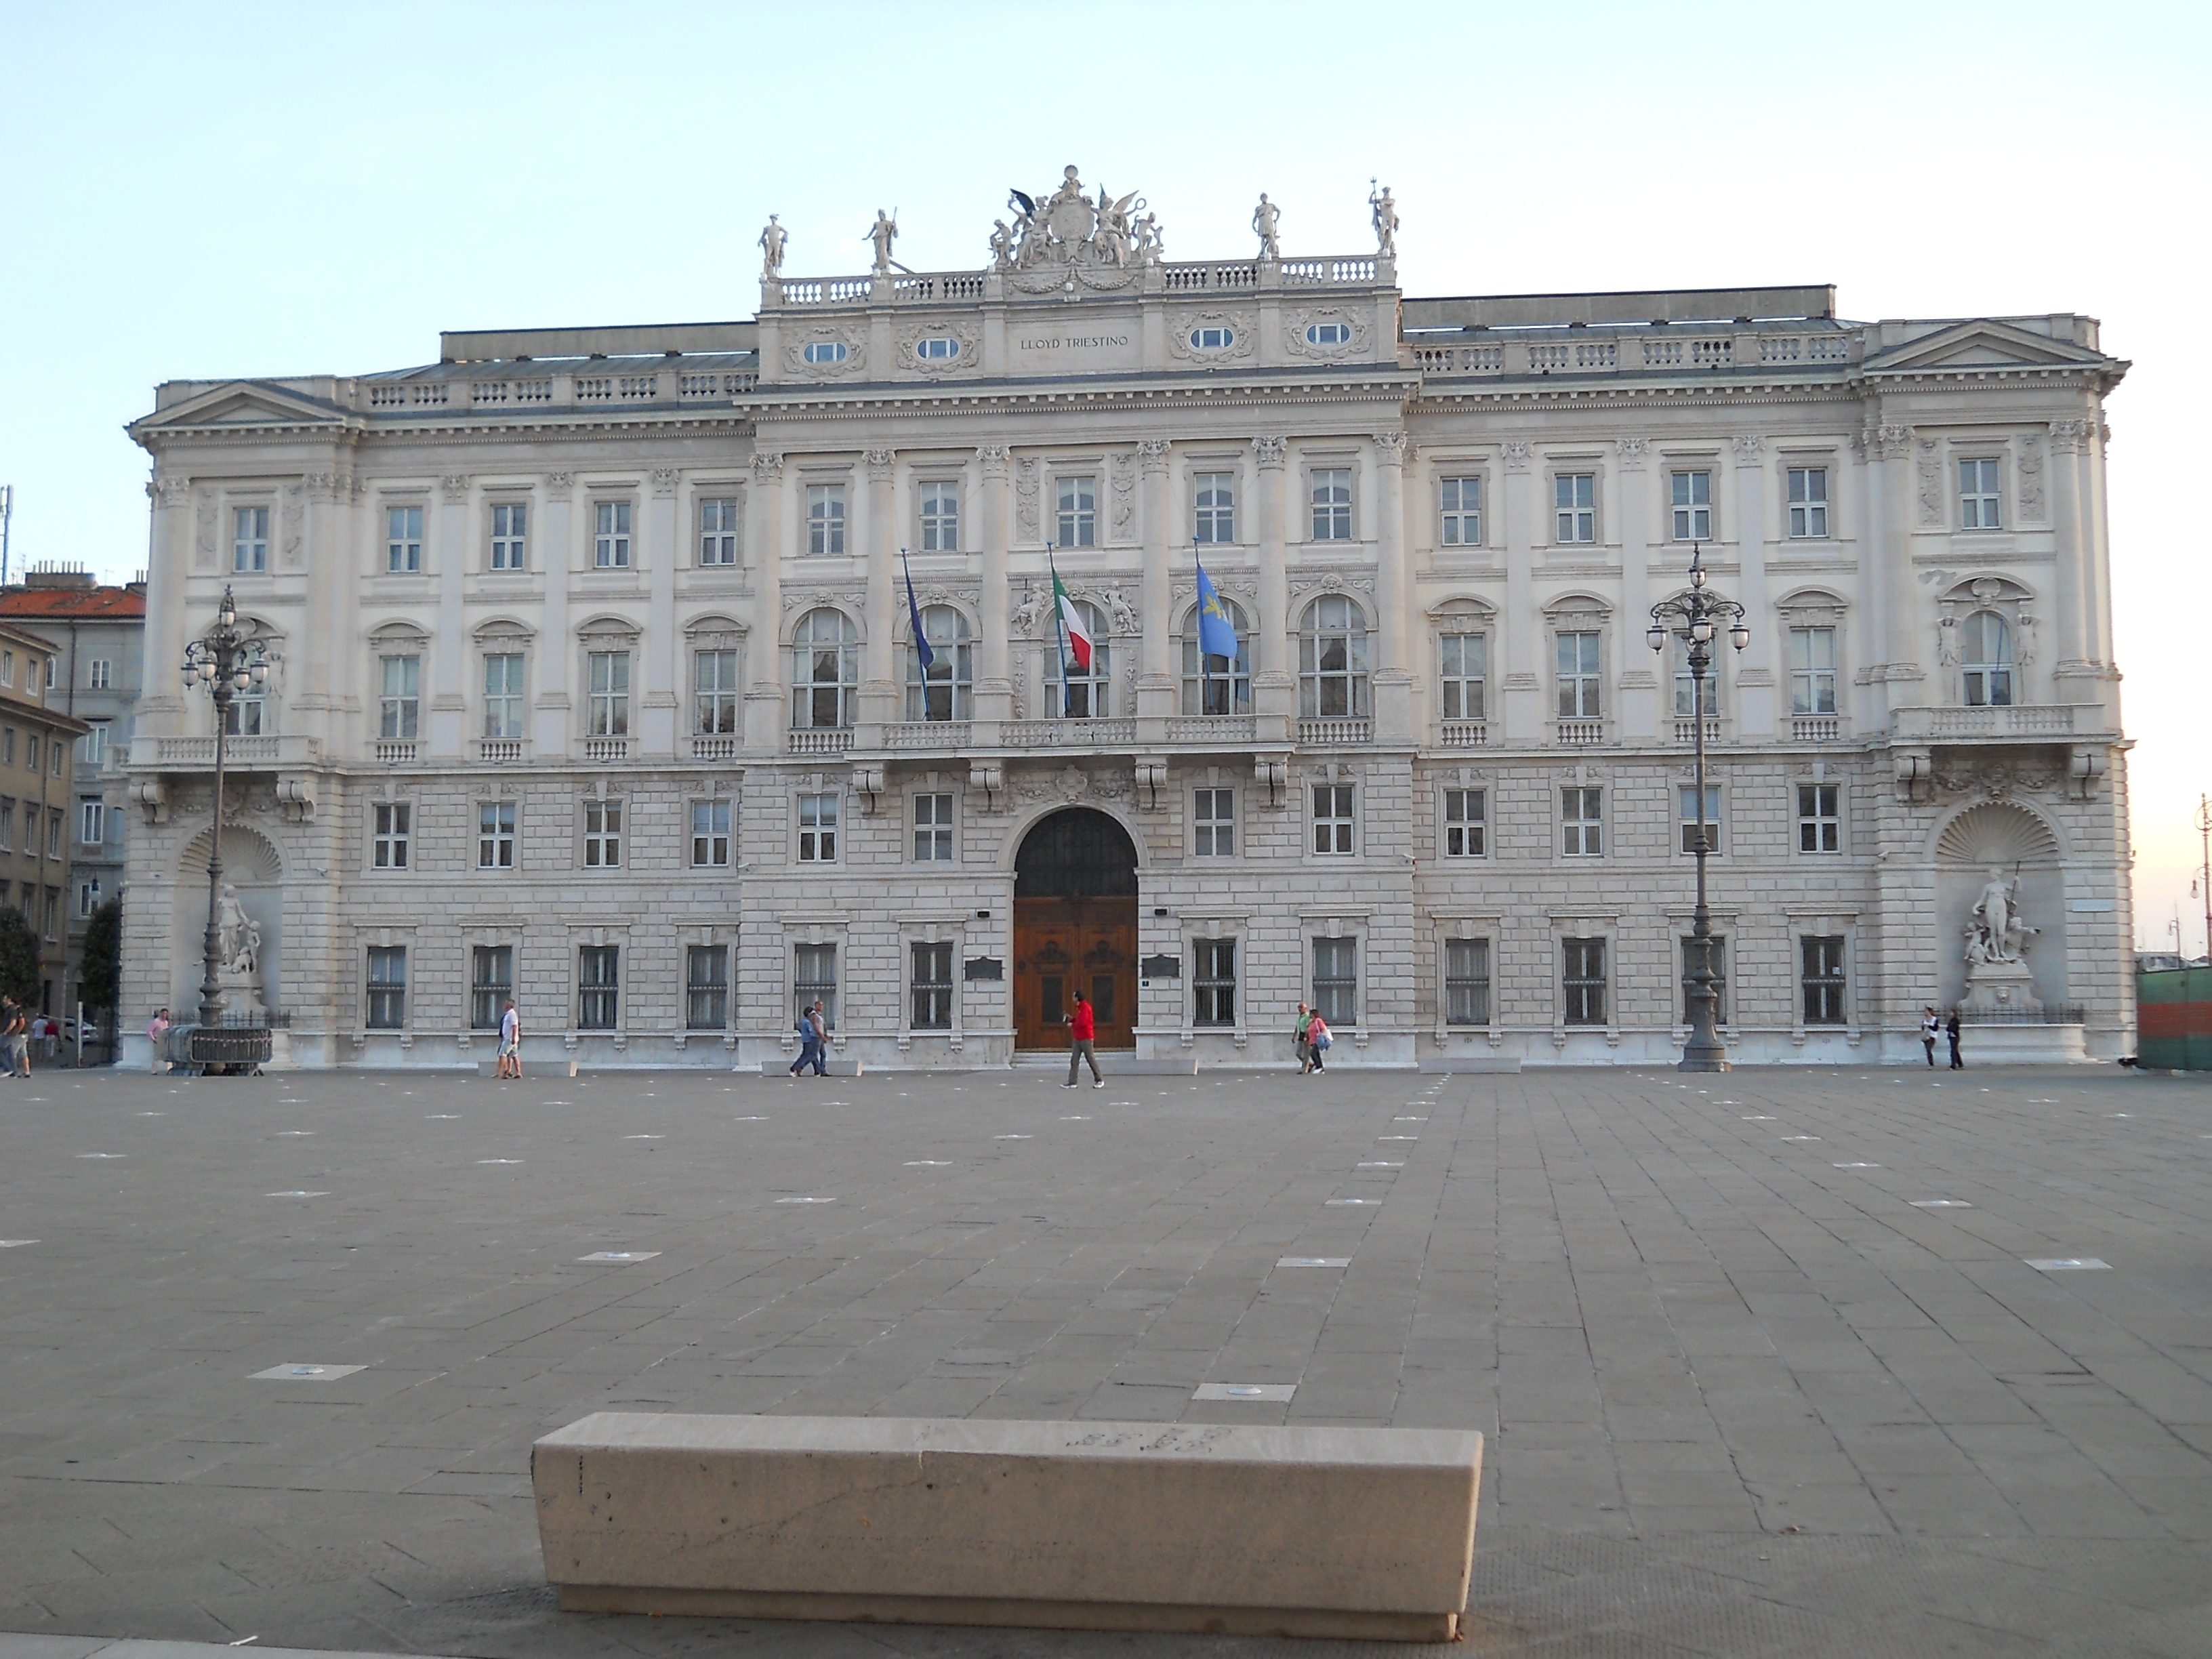 Piazza Unit? d'Italia in Trieste, Italy, showcasing a magnificent man-made monument.